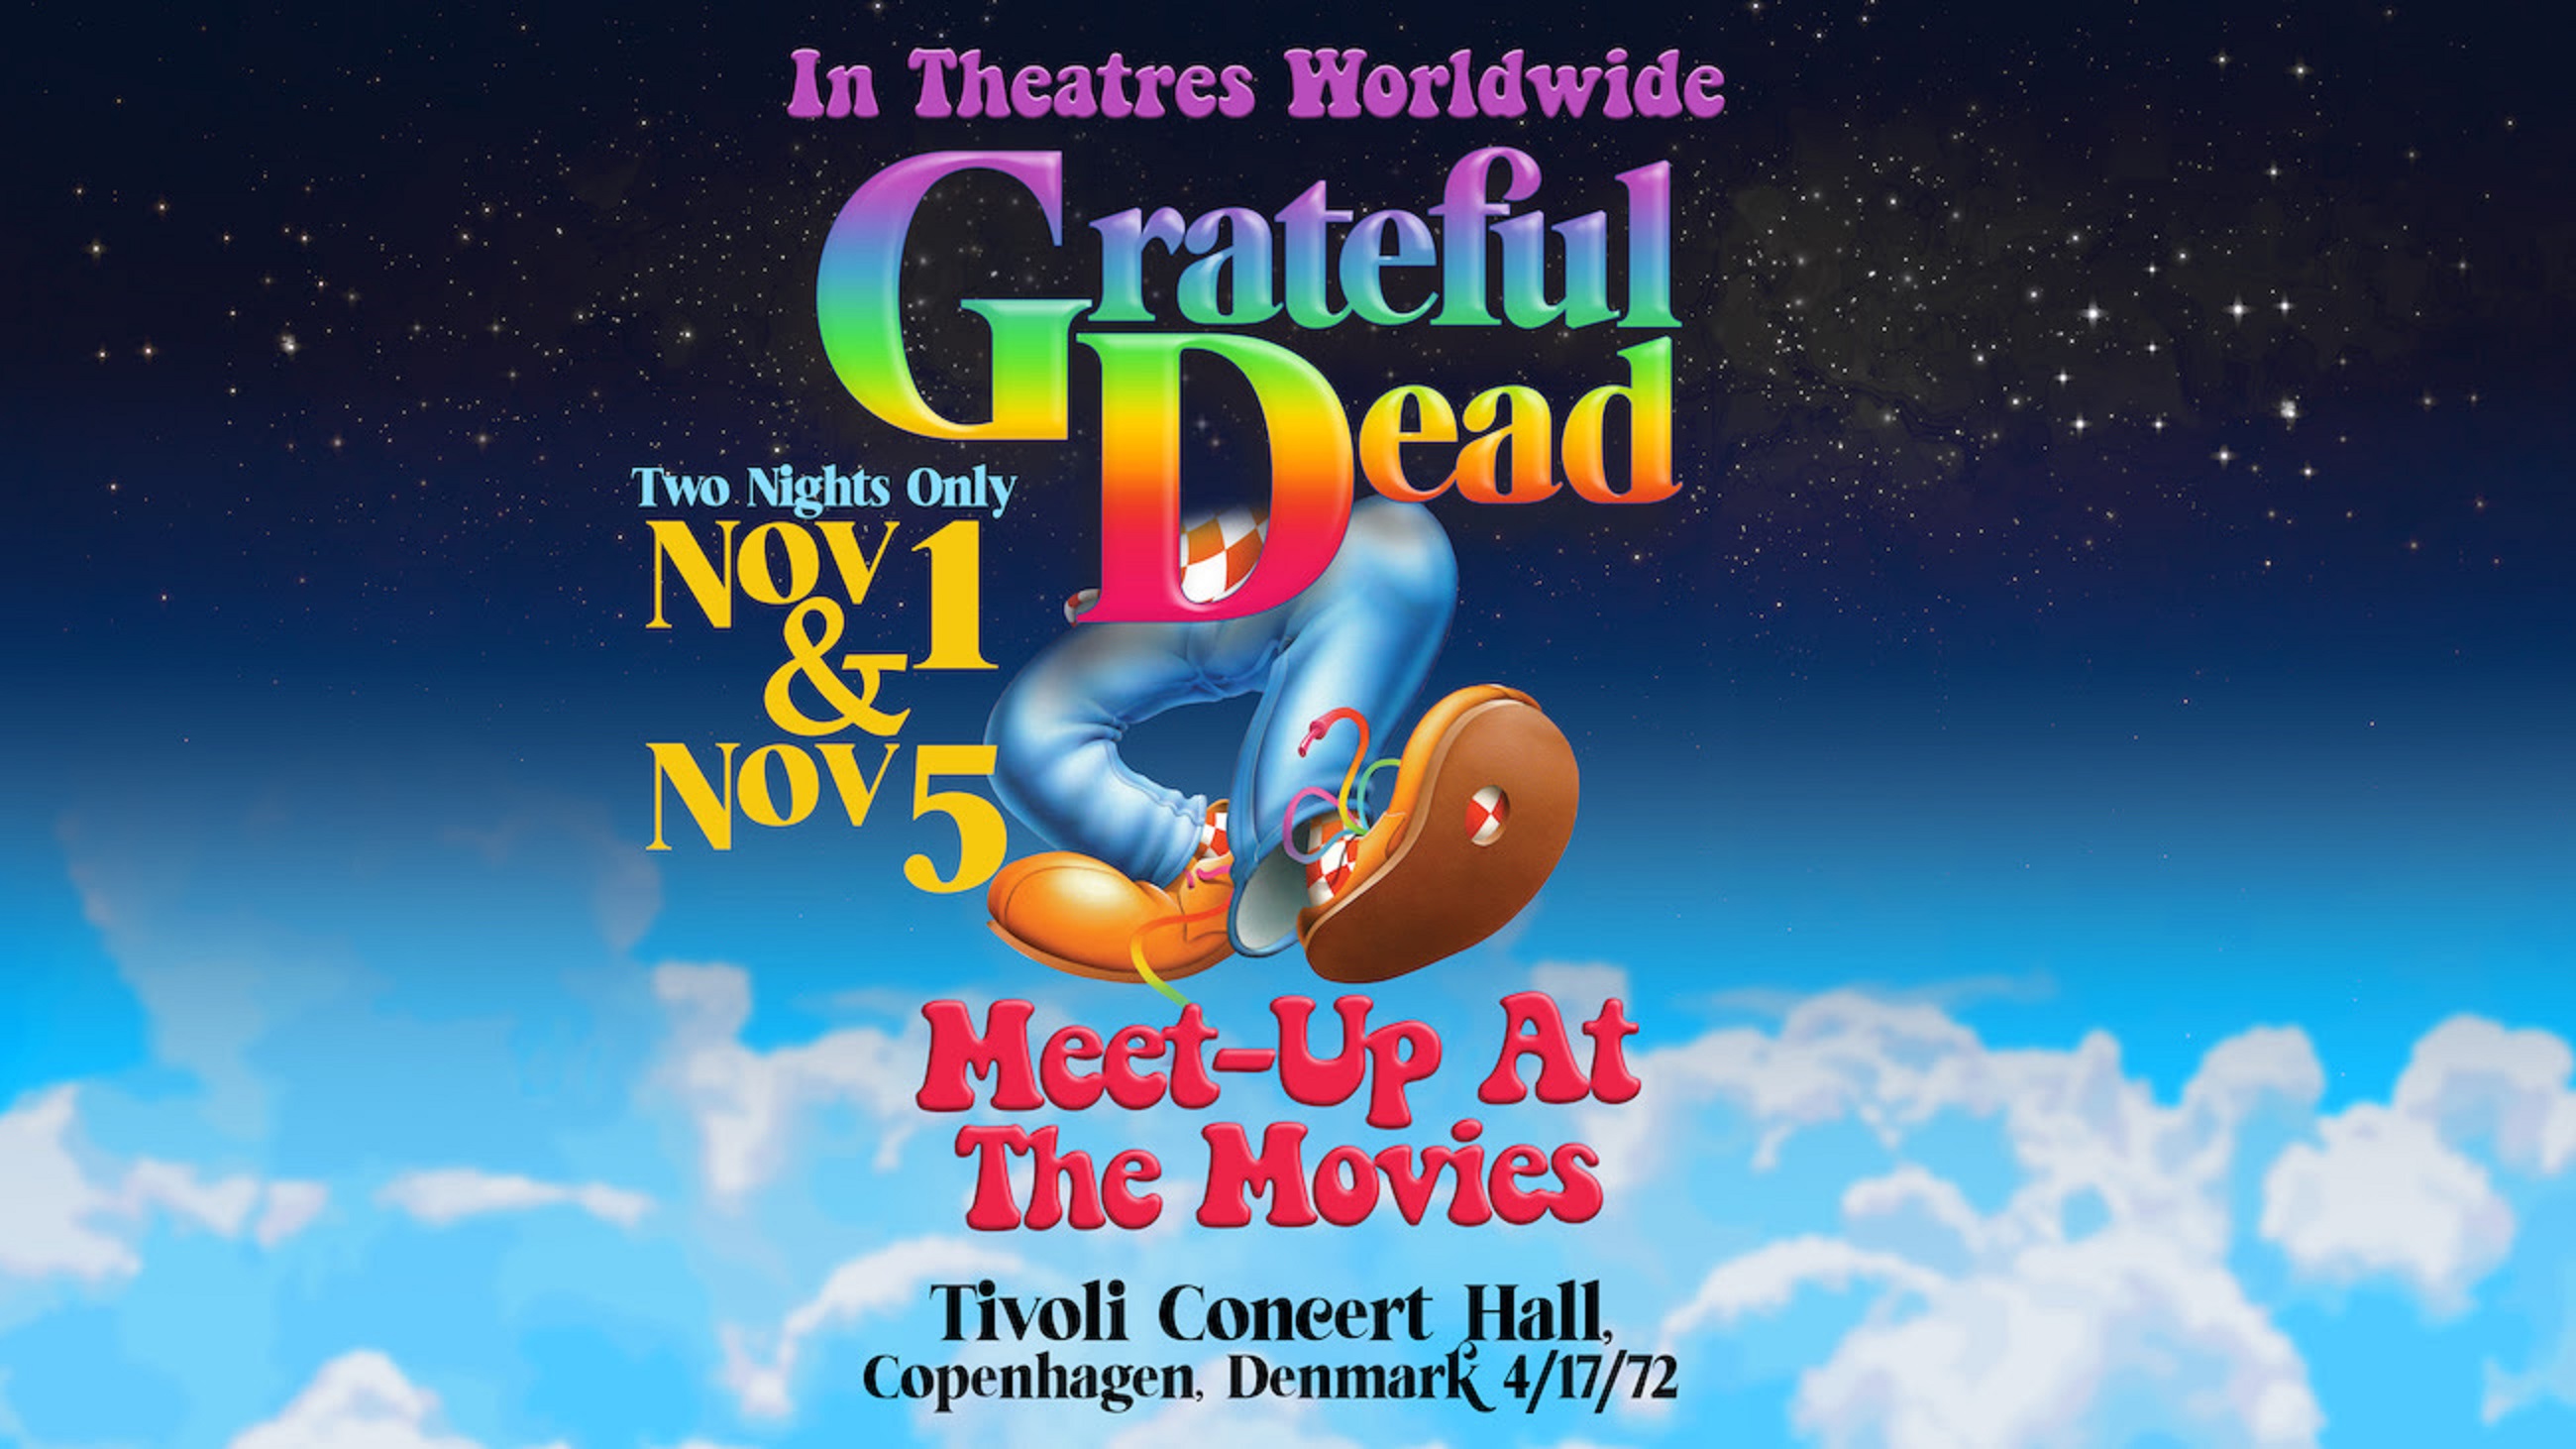 Grateful Dead Meet-Up At The Movies starts Tuesday